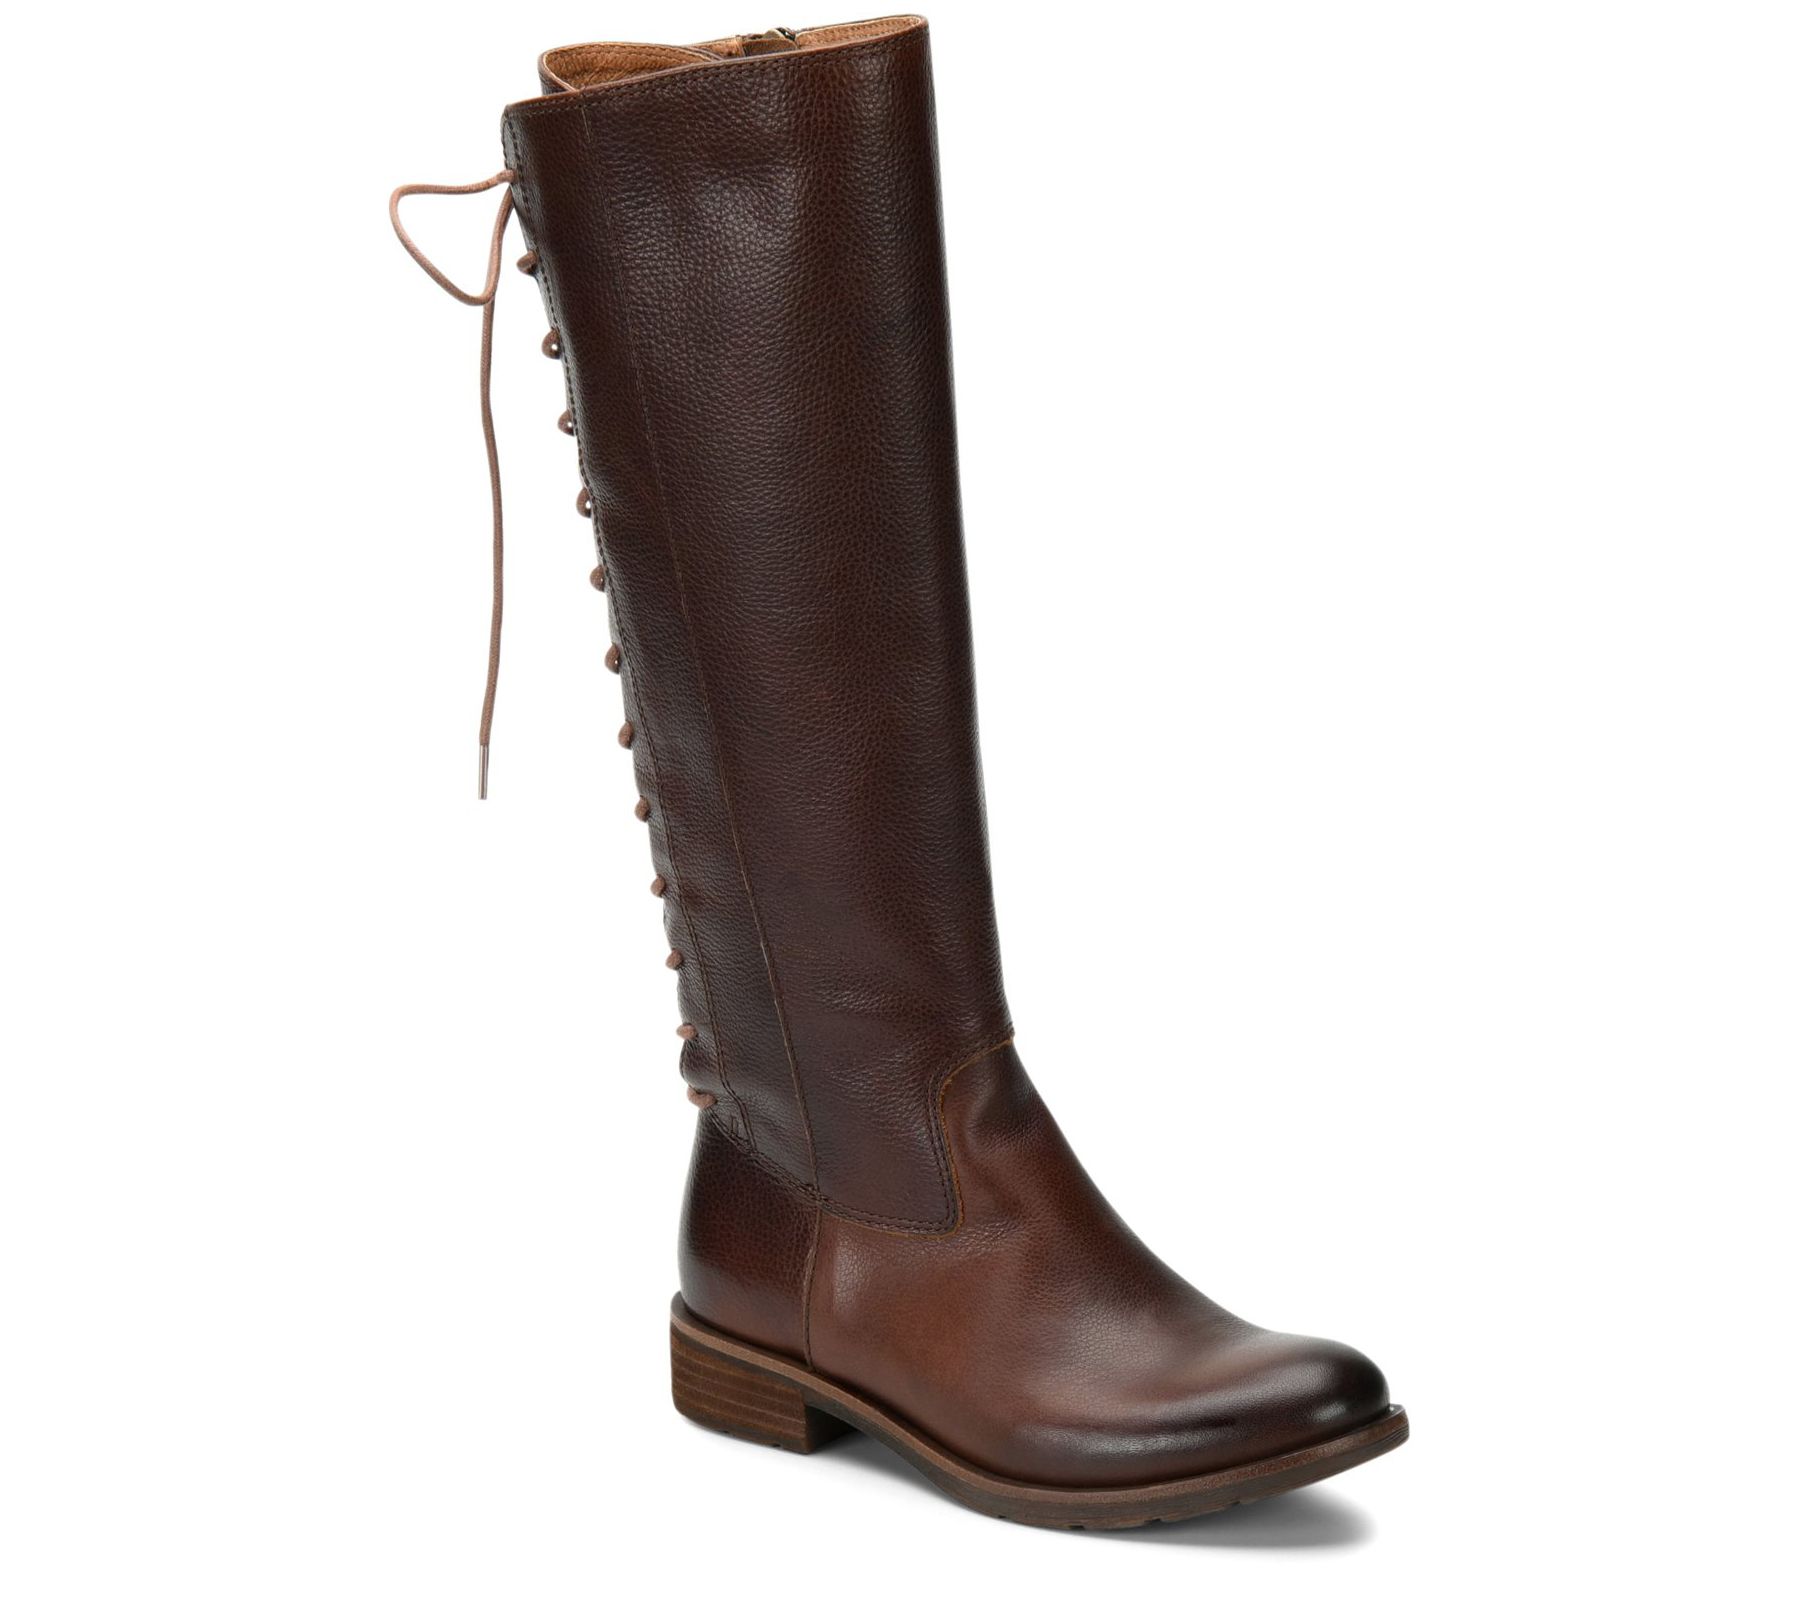 Sofft Sharnell II 8 Women's Whiskey